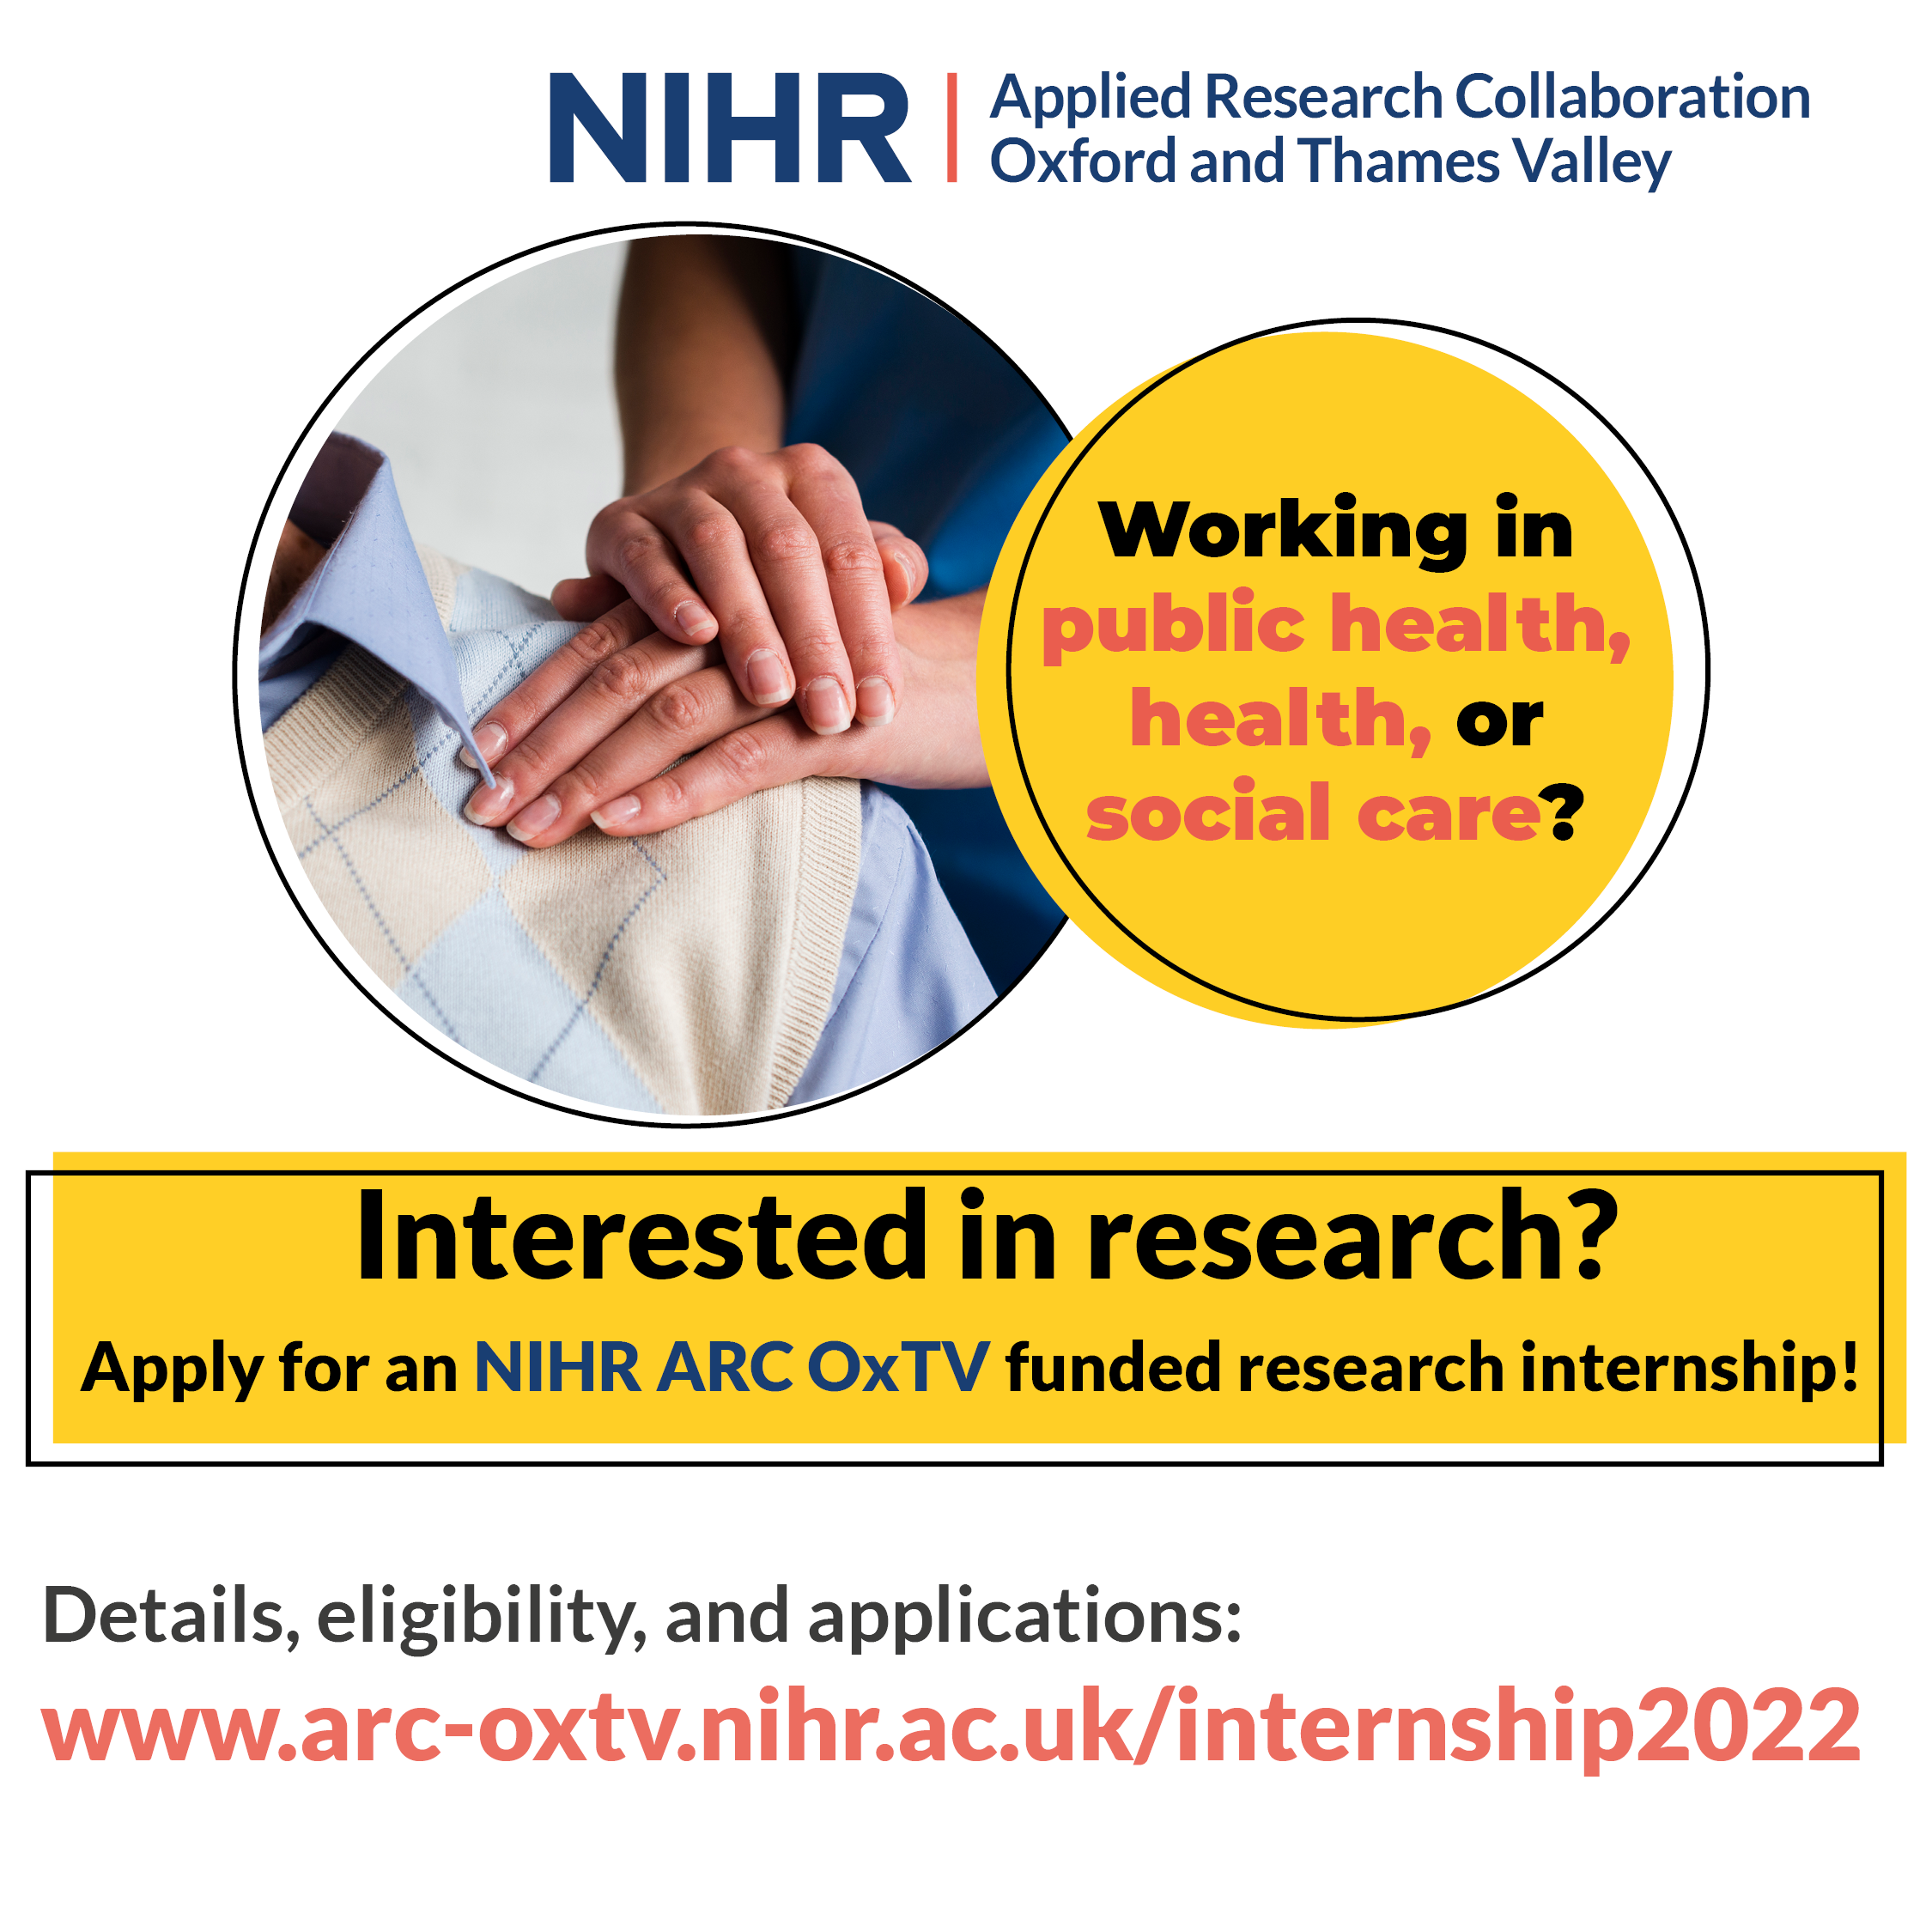 Internship opportunities at ARC Oxford and Thames Valley – 29 April deadline